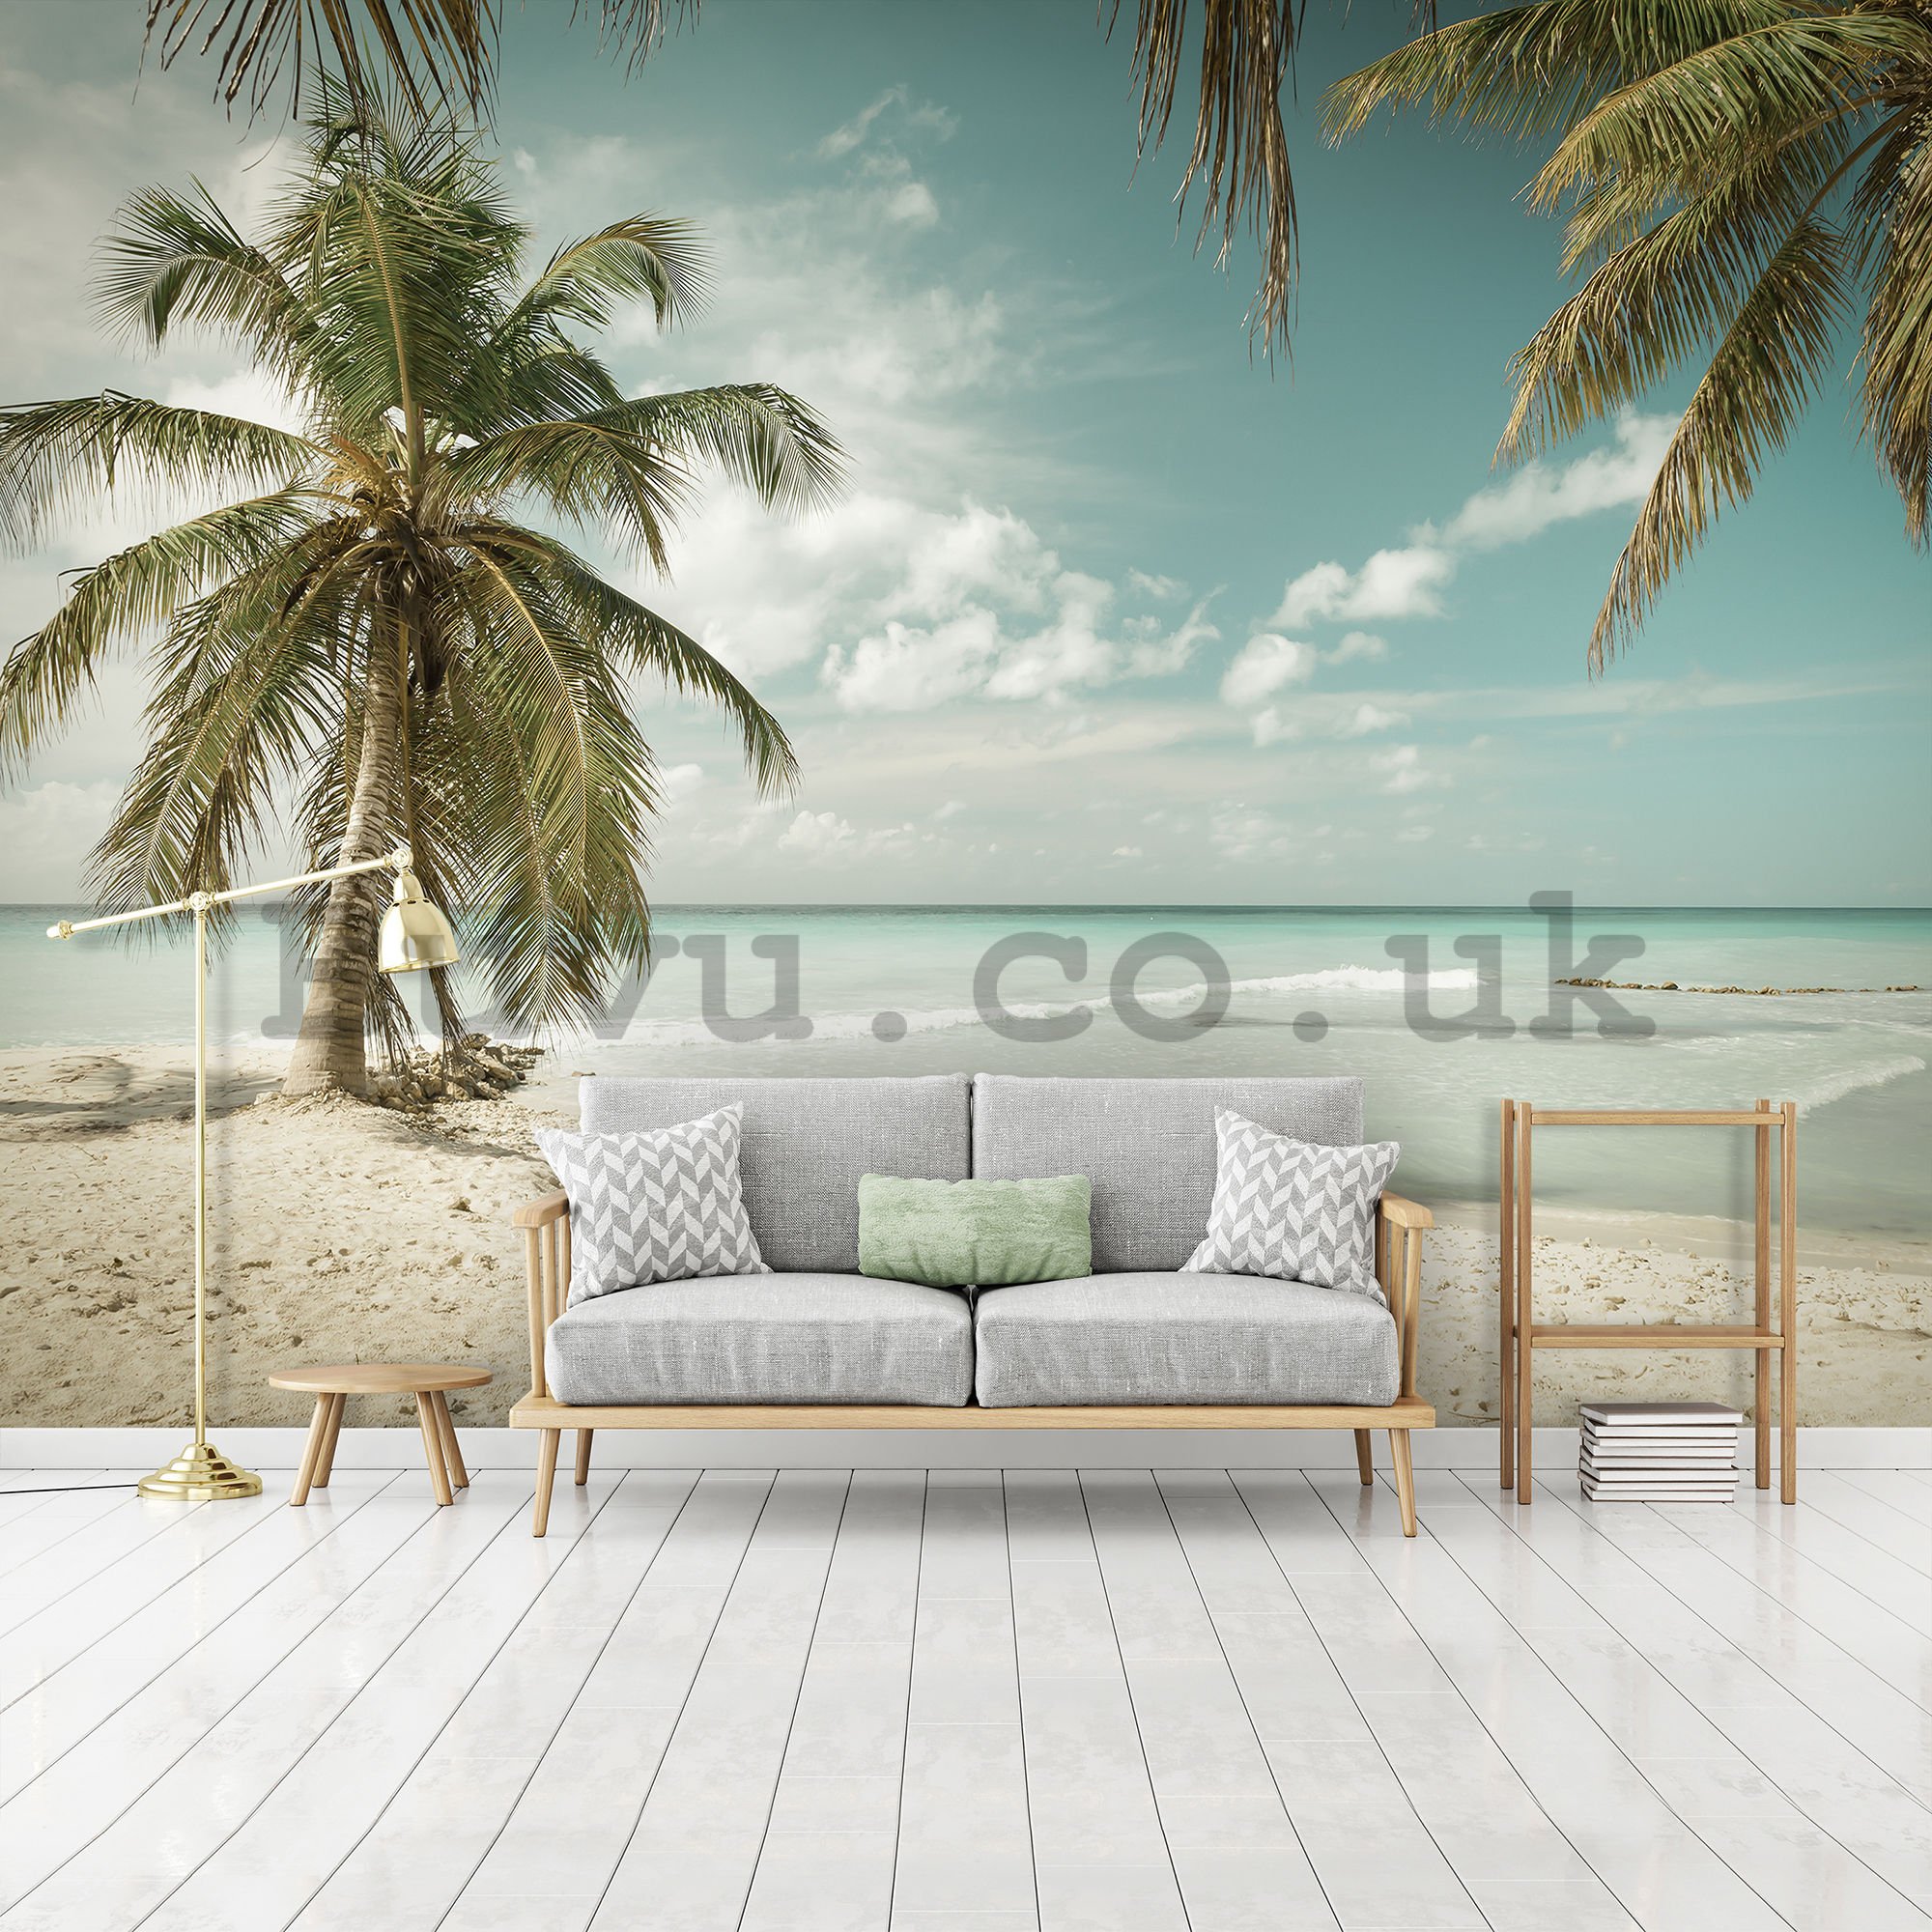 Wall mural vlies: Palm trees over the sea - 254x368 cm